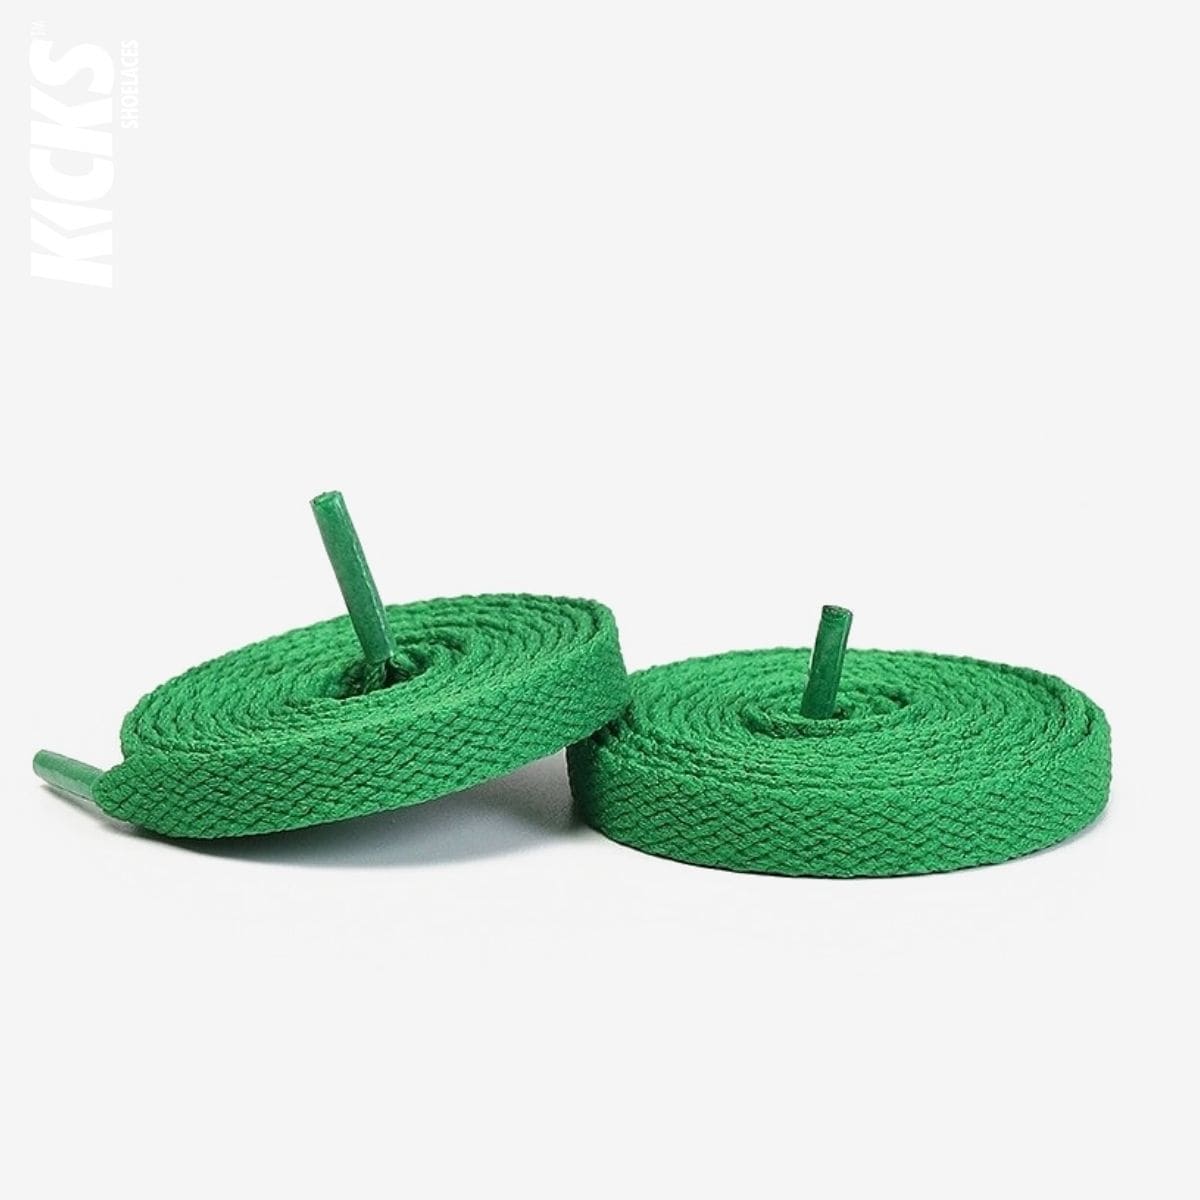 green-fun-shoelaces-suitable-for-tying shoelaces-on-popular-sneakers